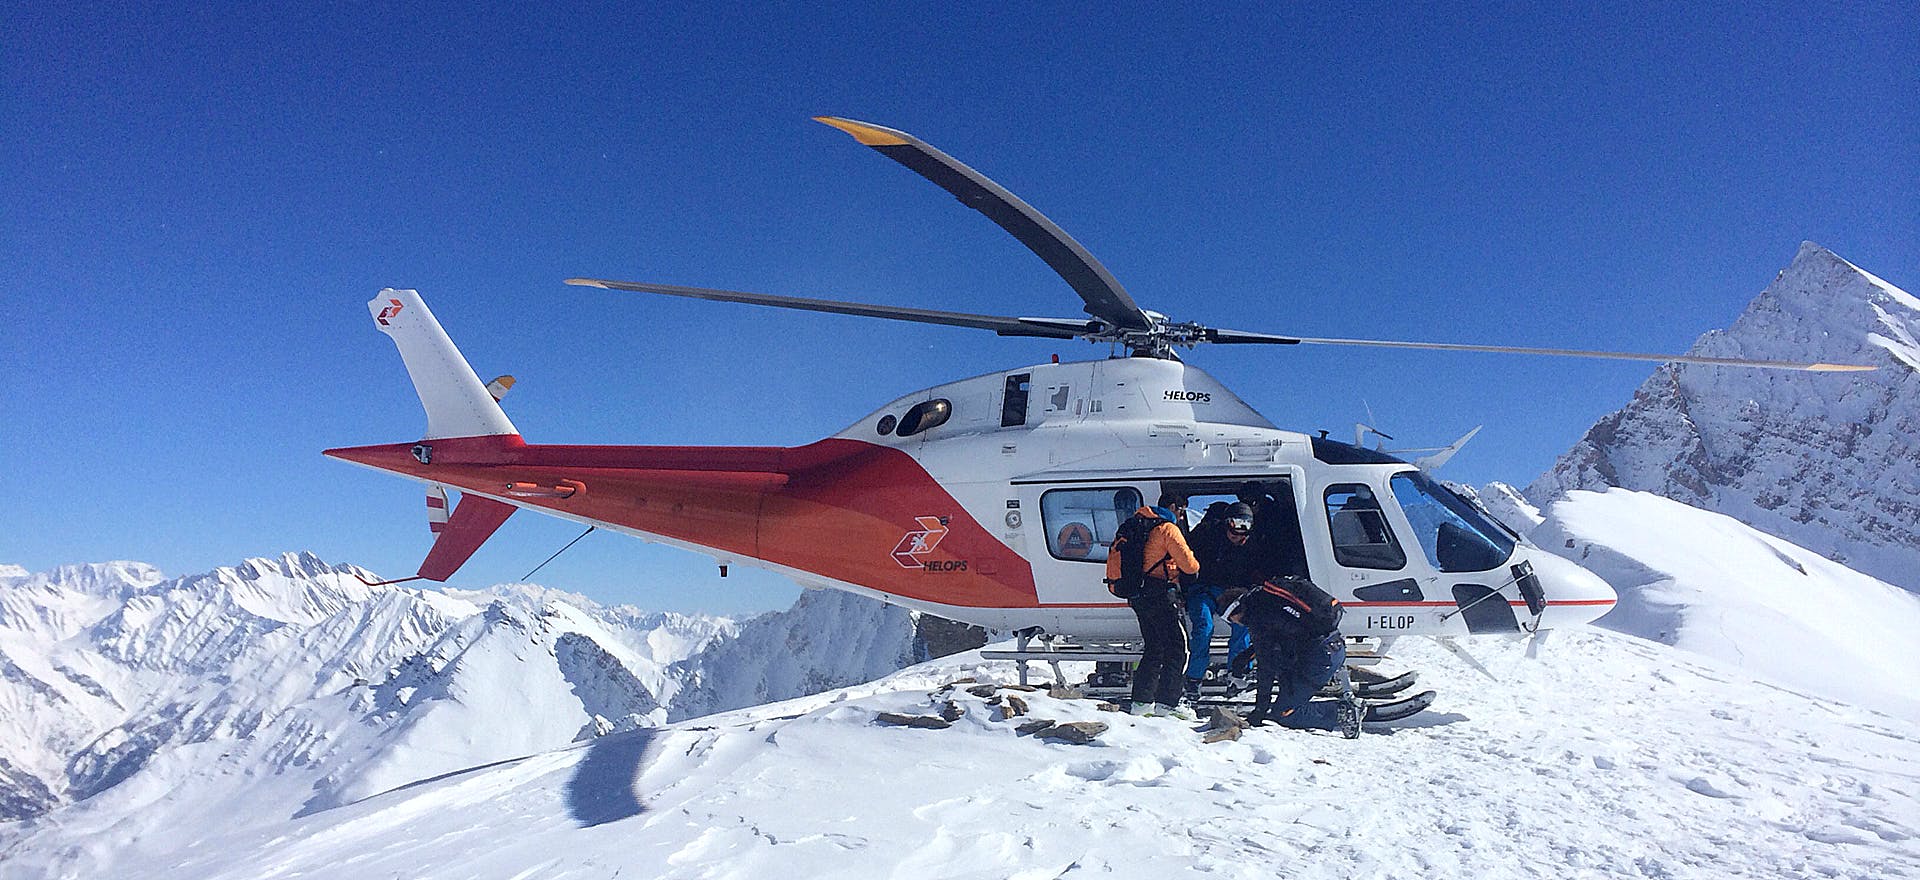 Best Helicopter Tours in Nepal